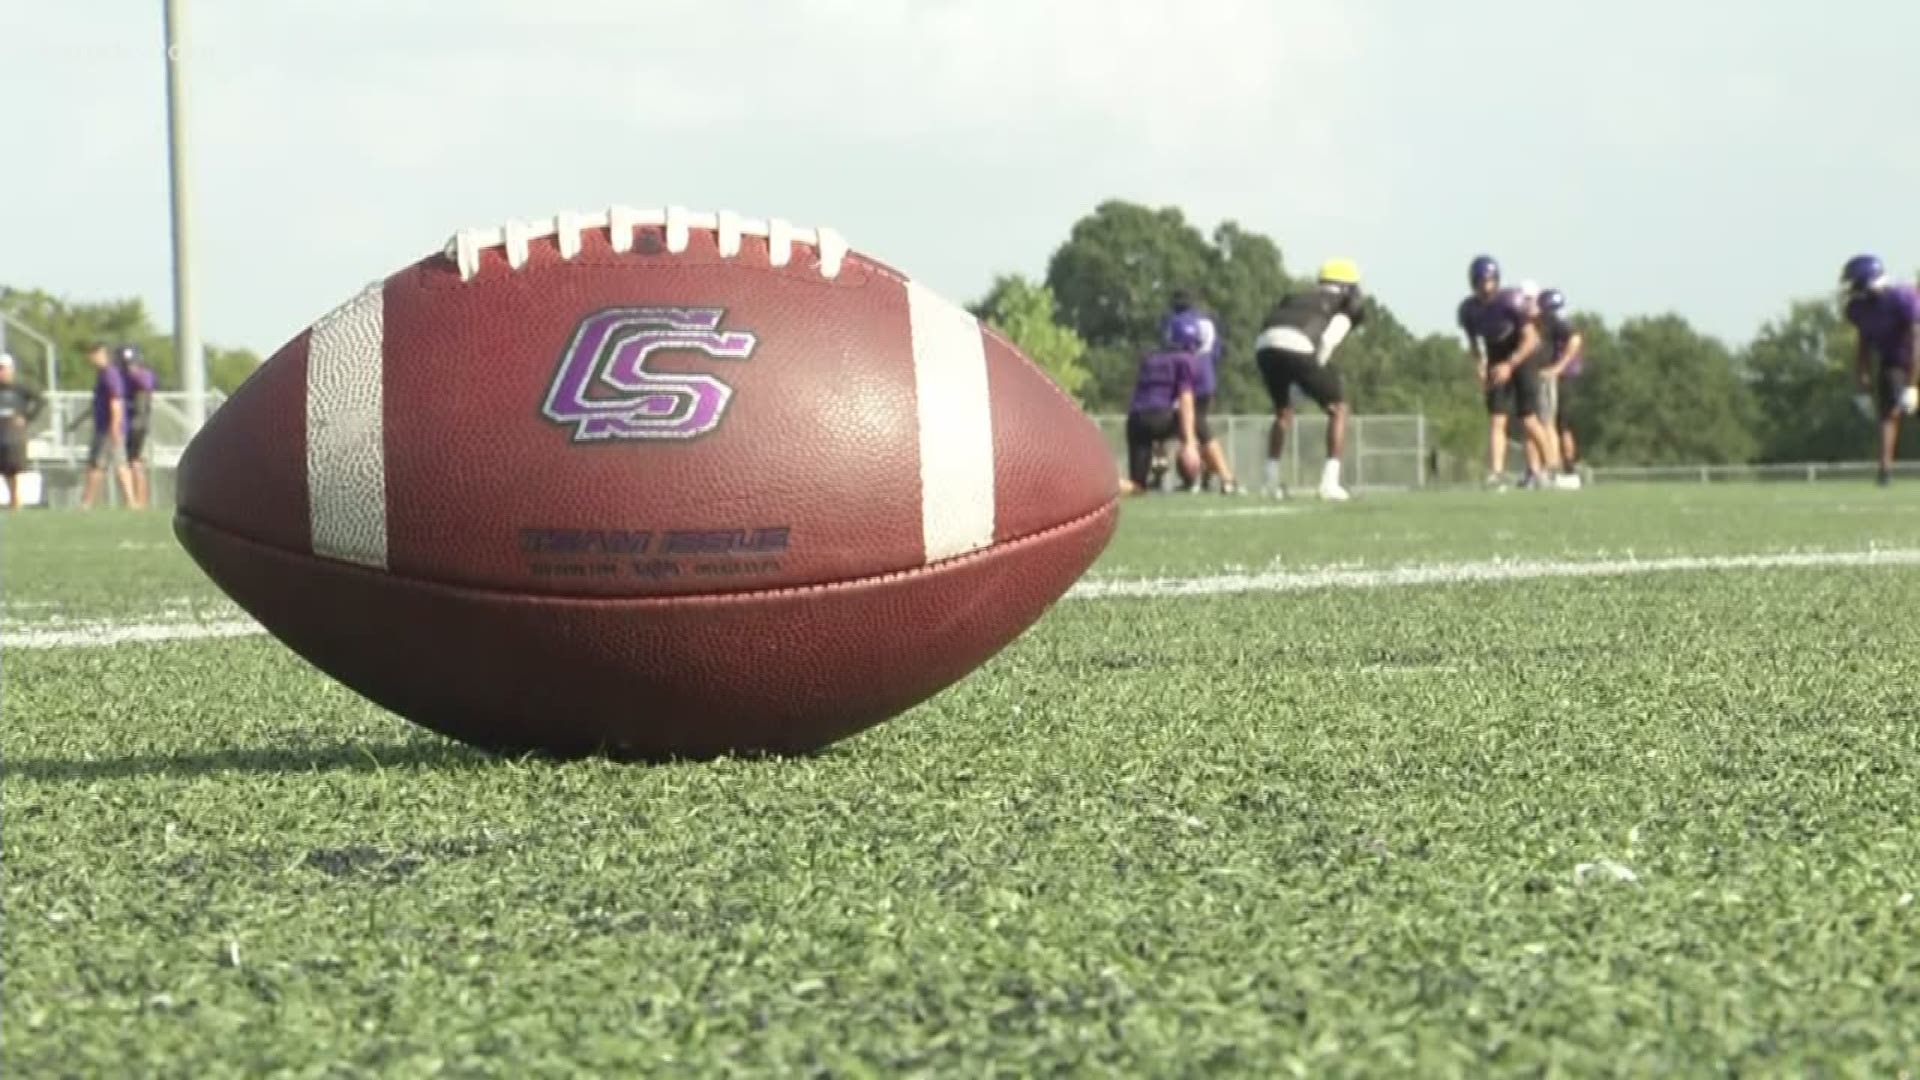 The College Station Cougars are trying to run teams off the field in 2019